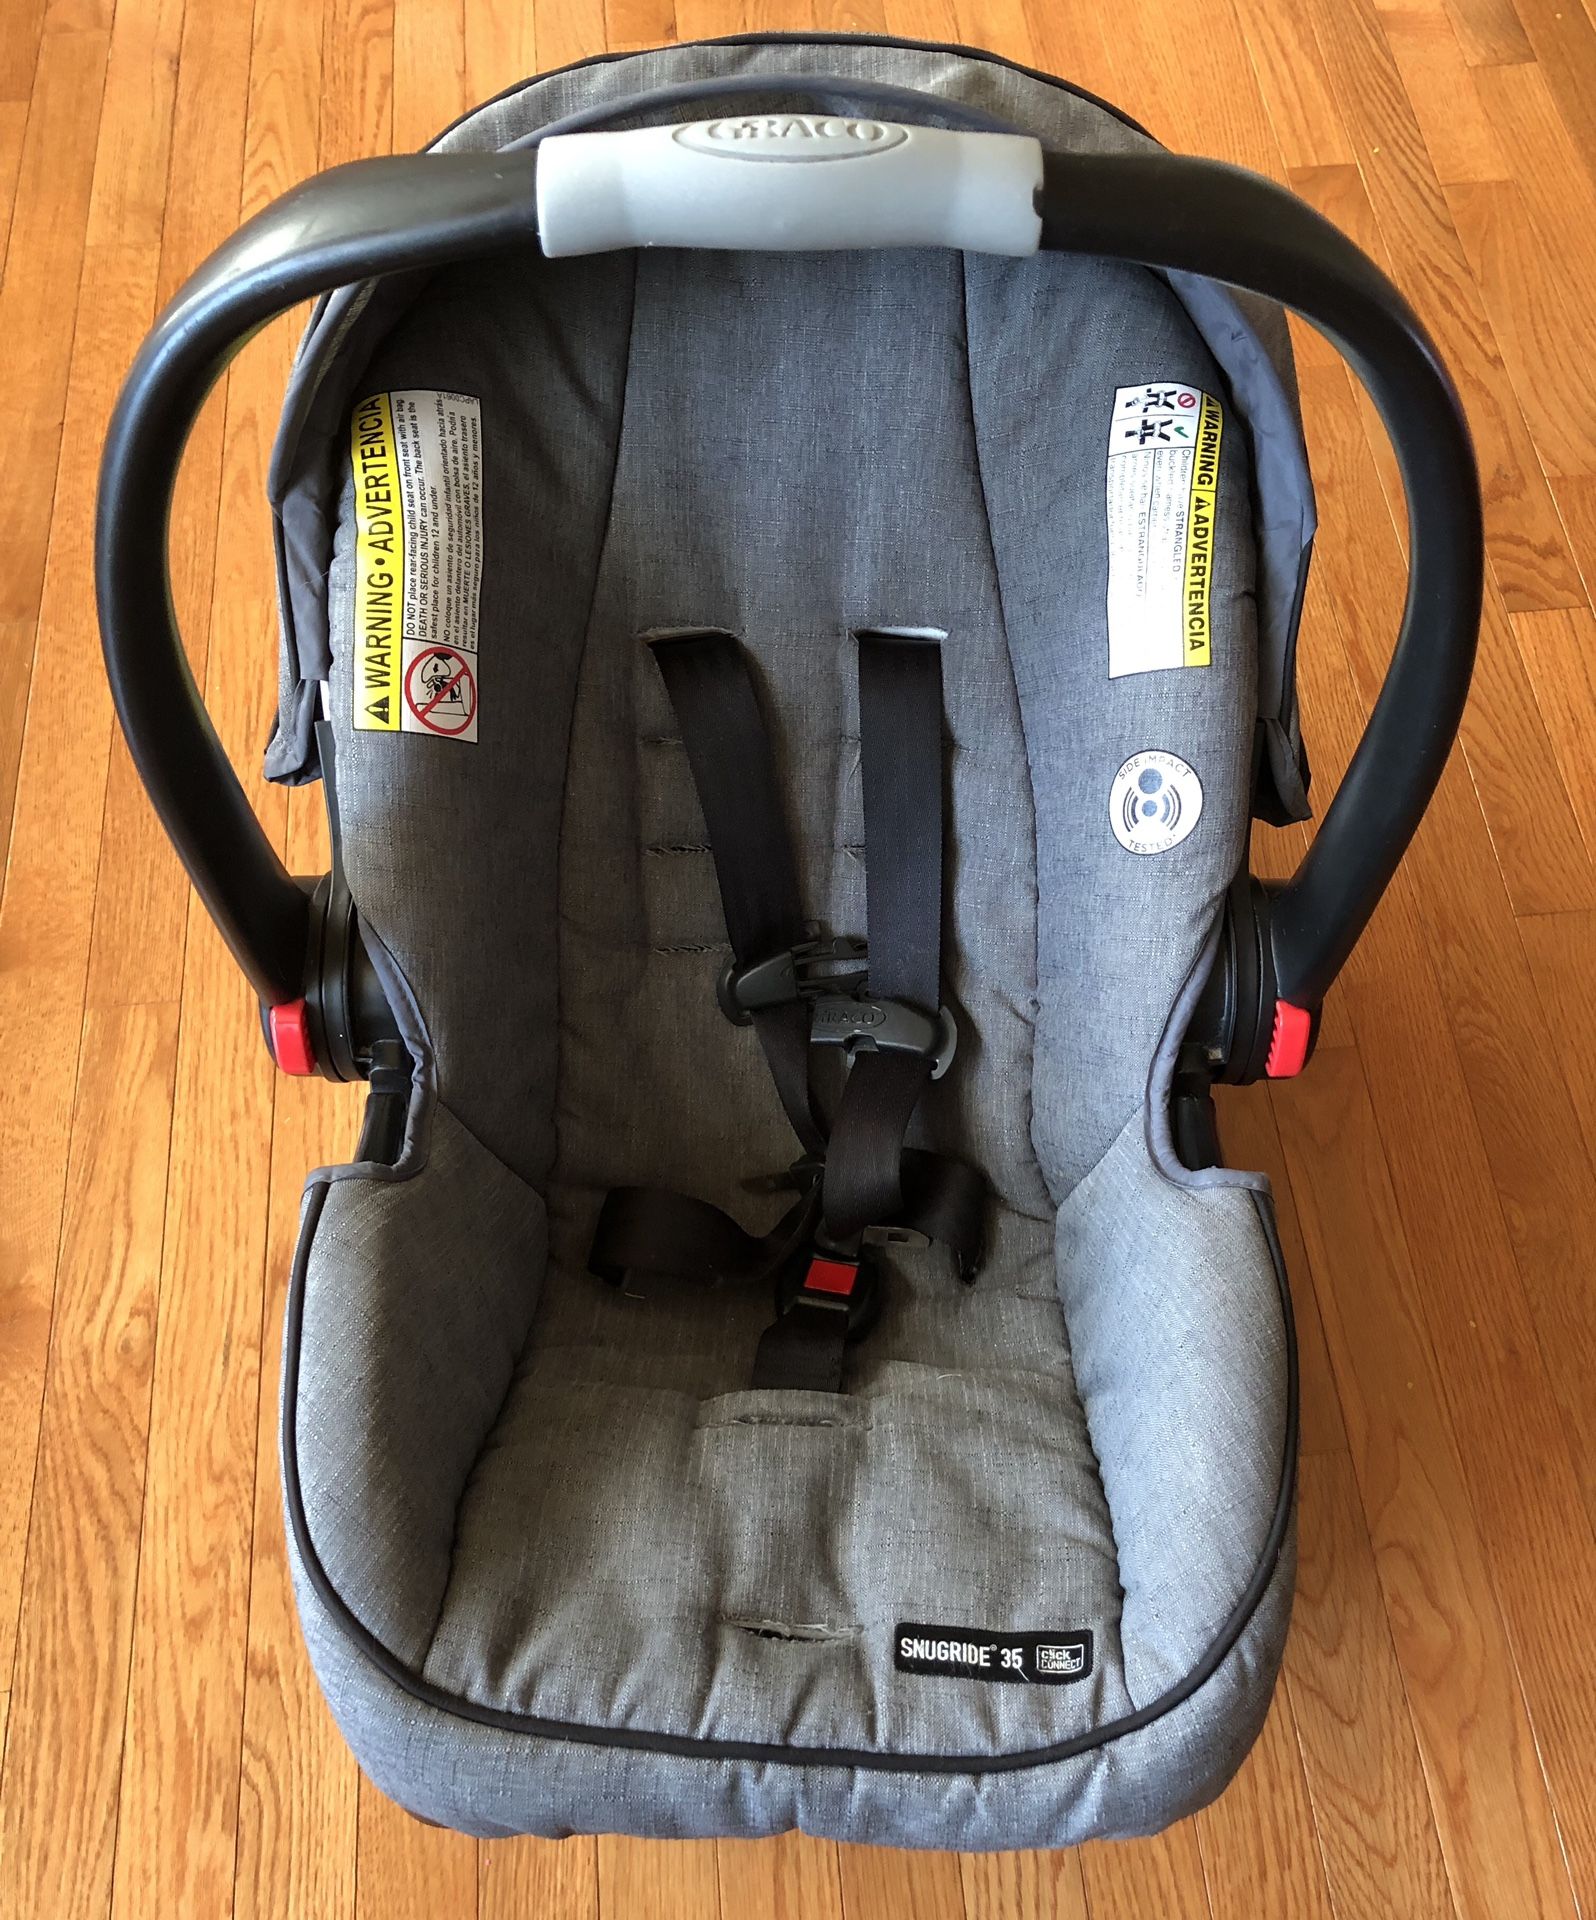 Graco Snugride 35 Click Connect Car seat and Base Charcoal Gray